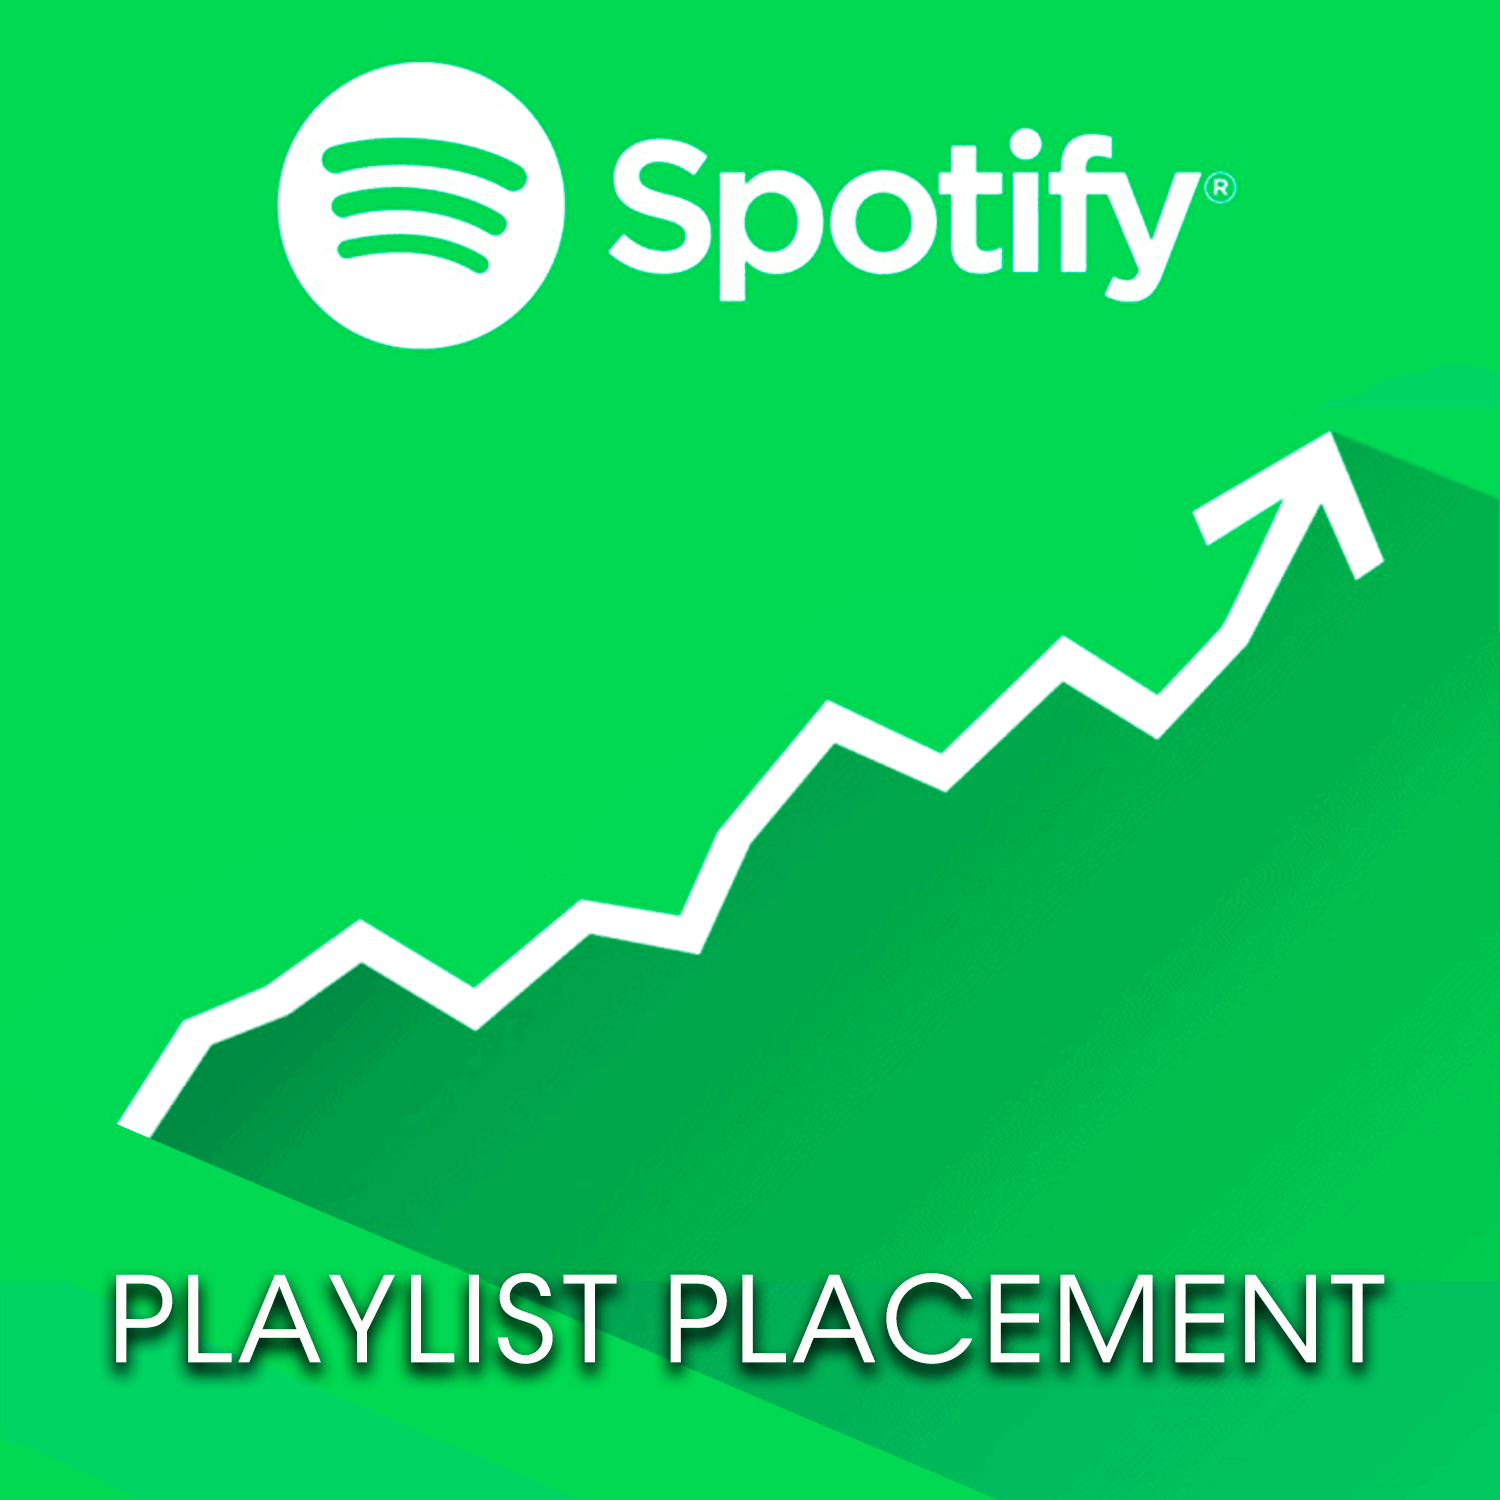 🎵More Fans Agency (Free Trials)
💎Testimonials + Free Trials
📈Spotify, Soundcloud, Instagram
Free Submission ➡ https://t.co/IPIMnDfmtg